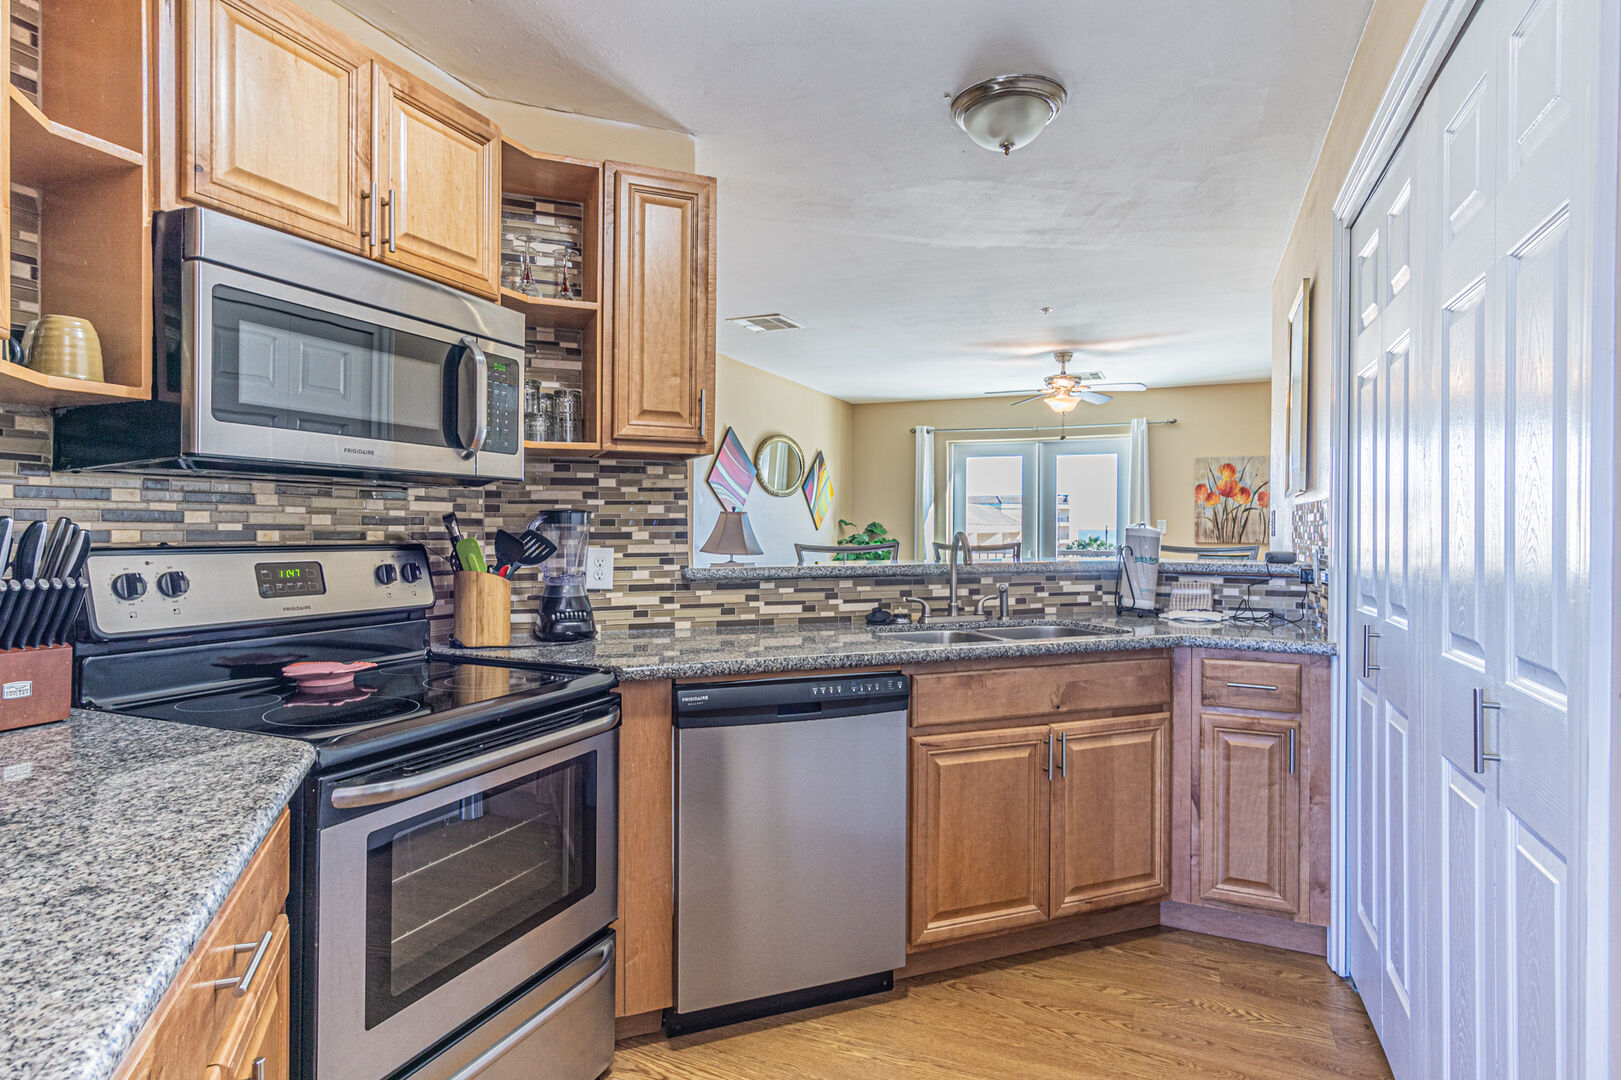 Kitchen fully equipped with full sized appliances and everything a 